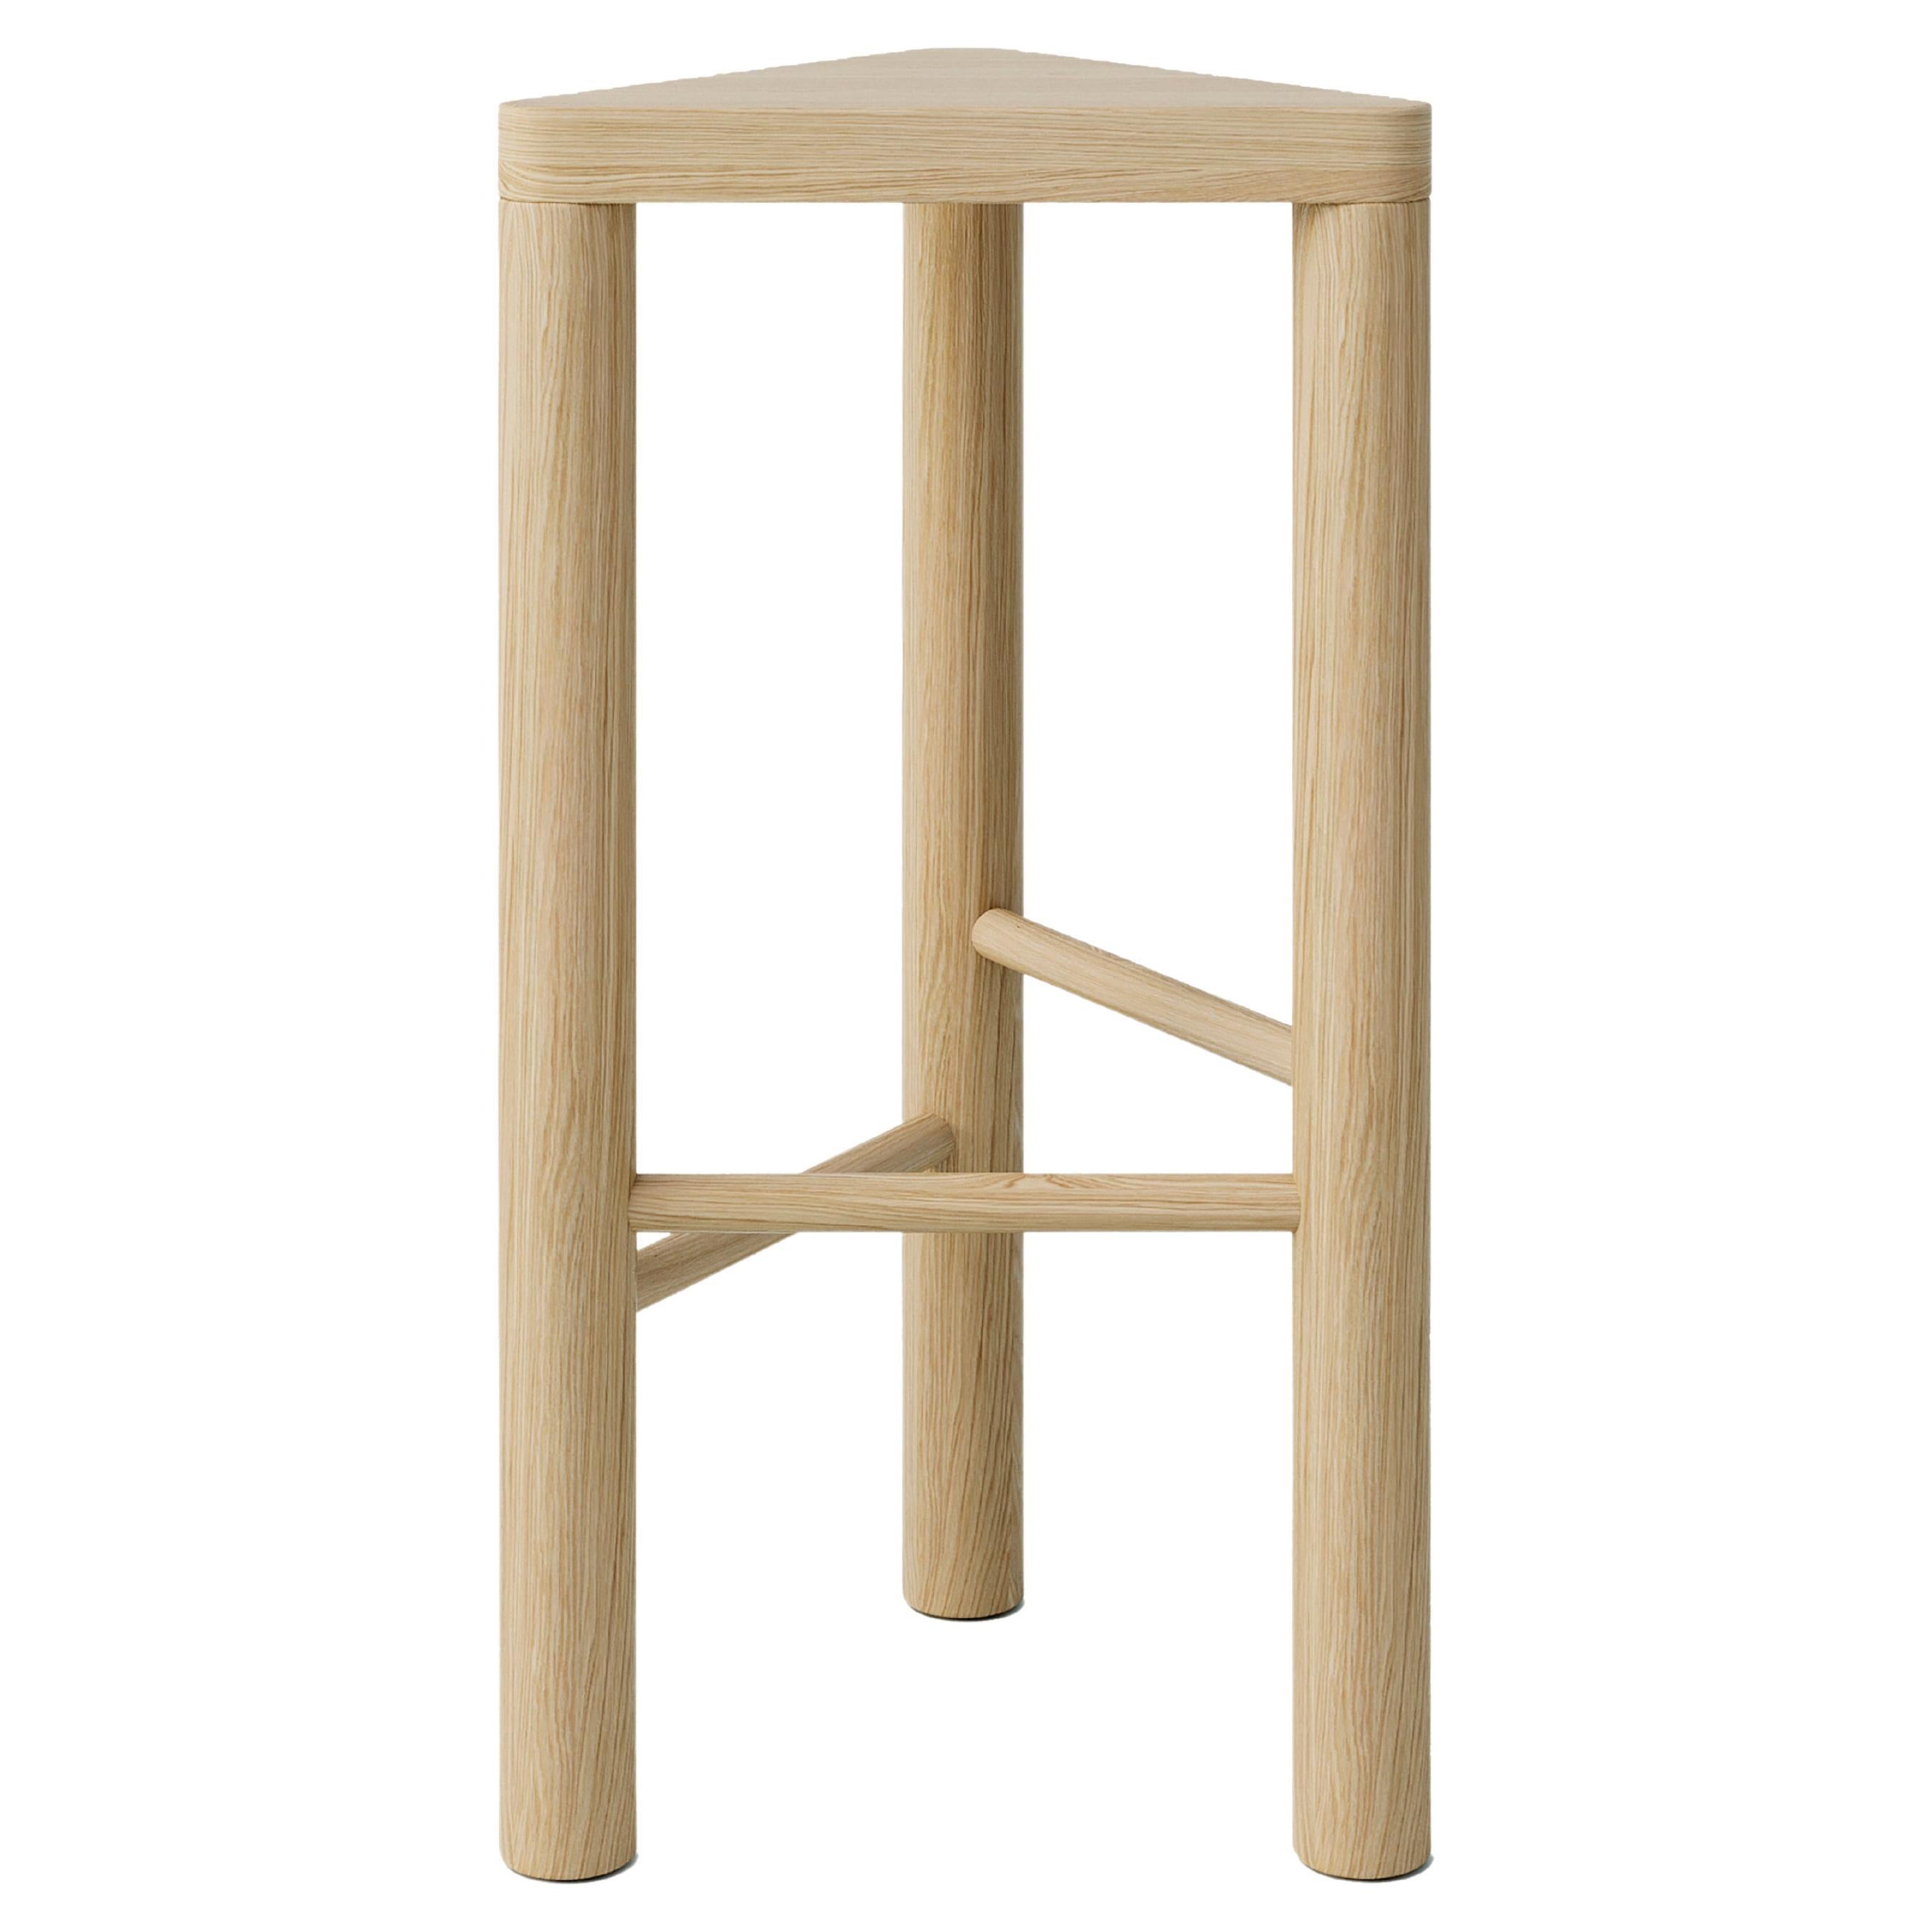 "Anyday Bar Stool" Wood Stool by oitoproducts